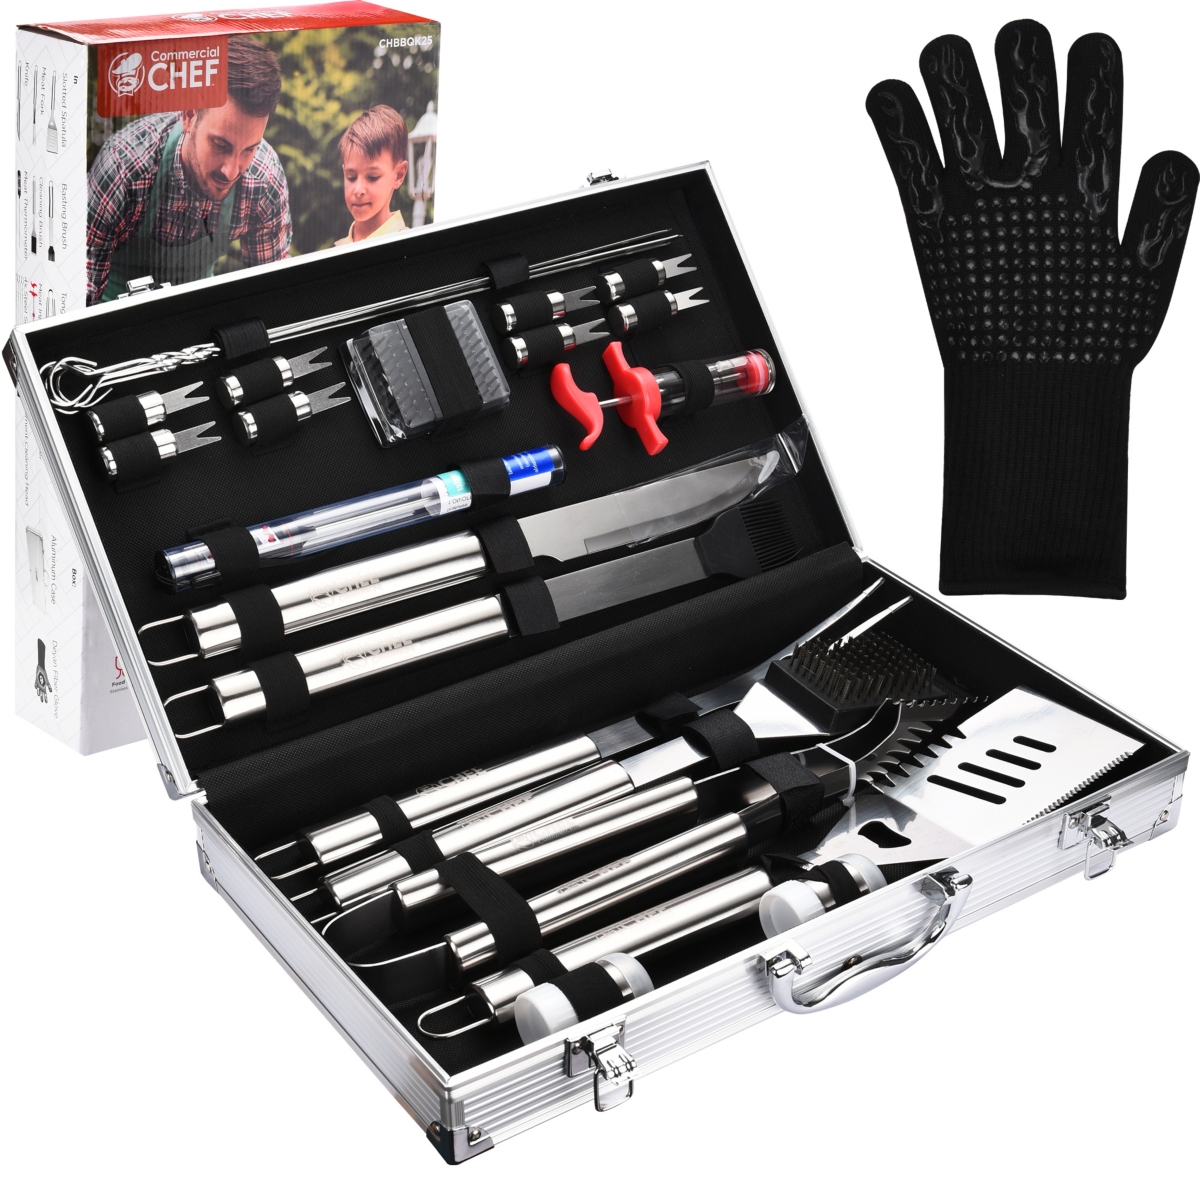 Premium 25 Piece Stainless Steel Barbeque Grill Tool Set with Aluminum Hard Case